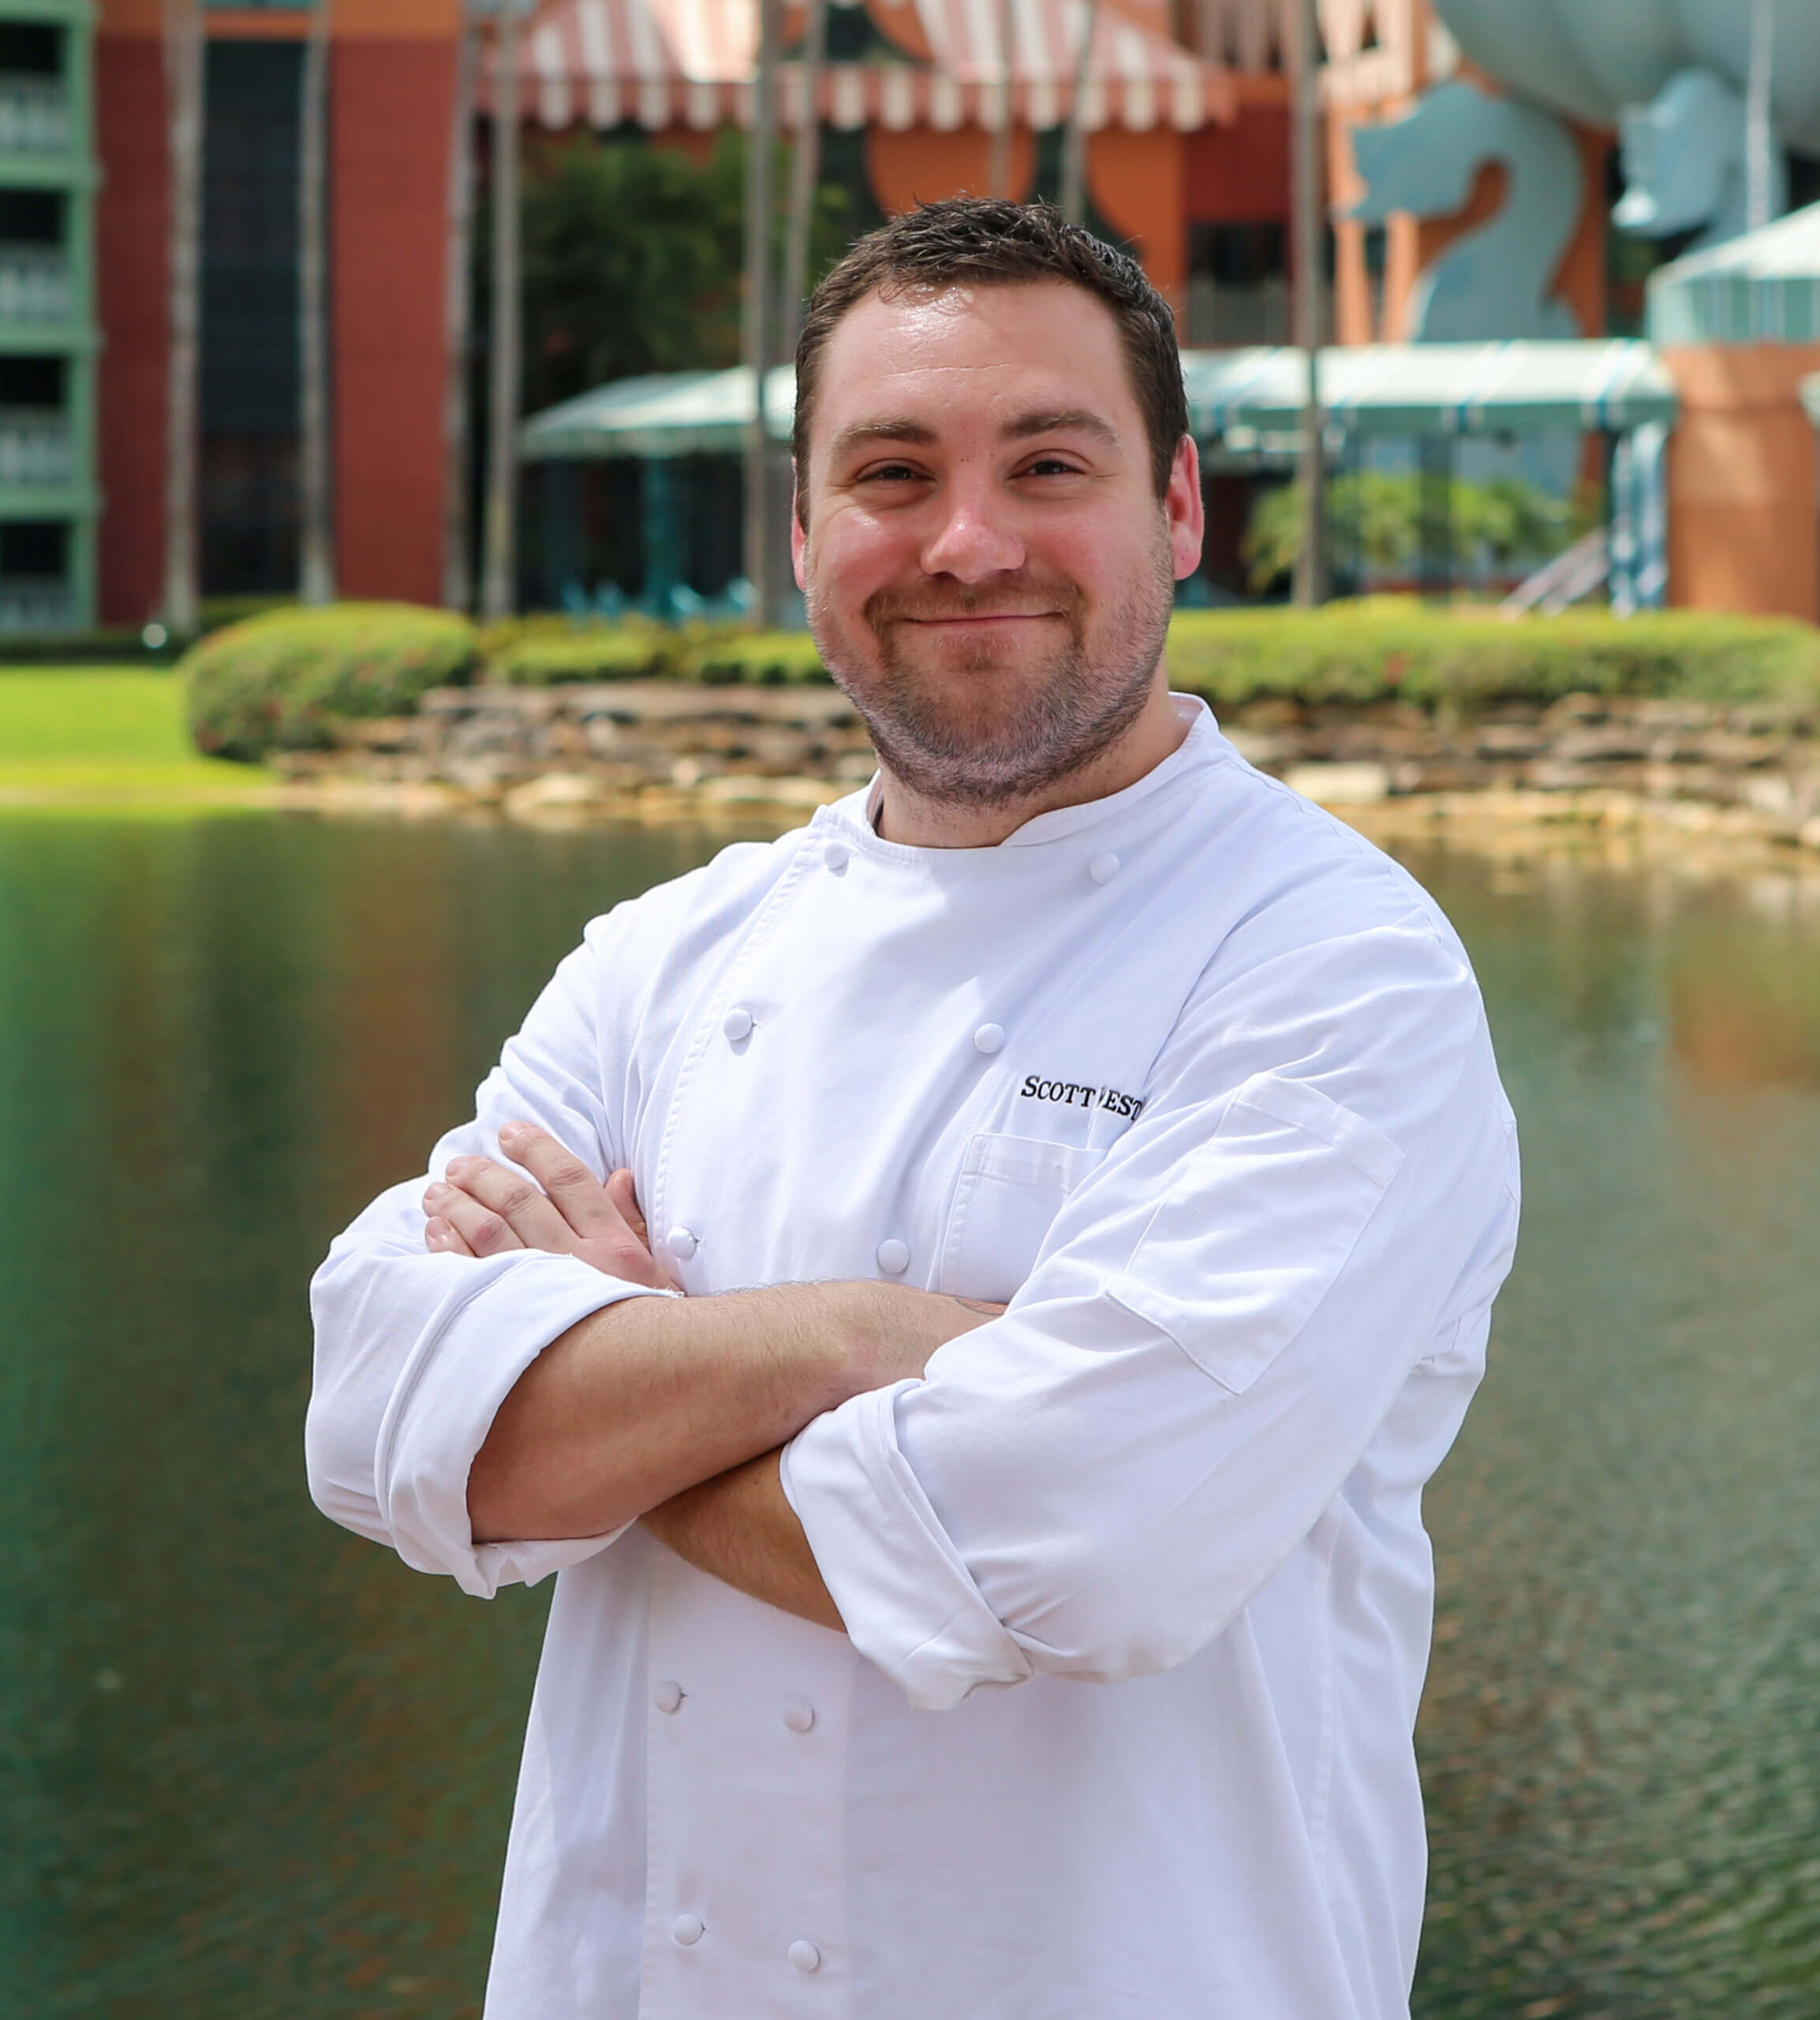 Chef Scott with Hotel in the Background